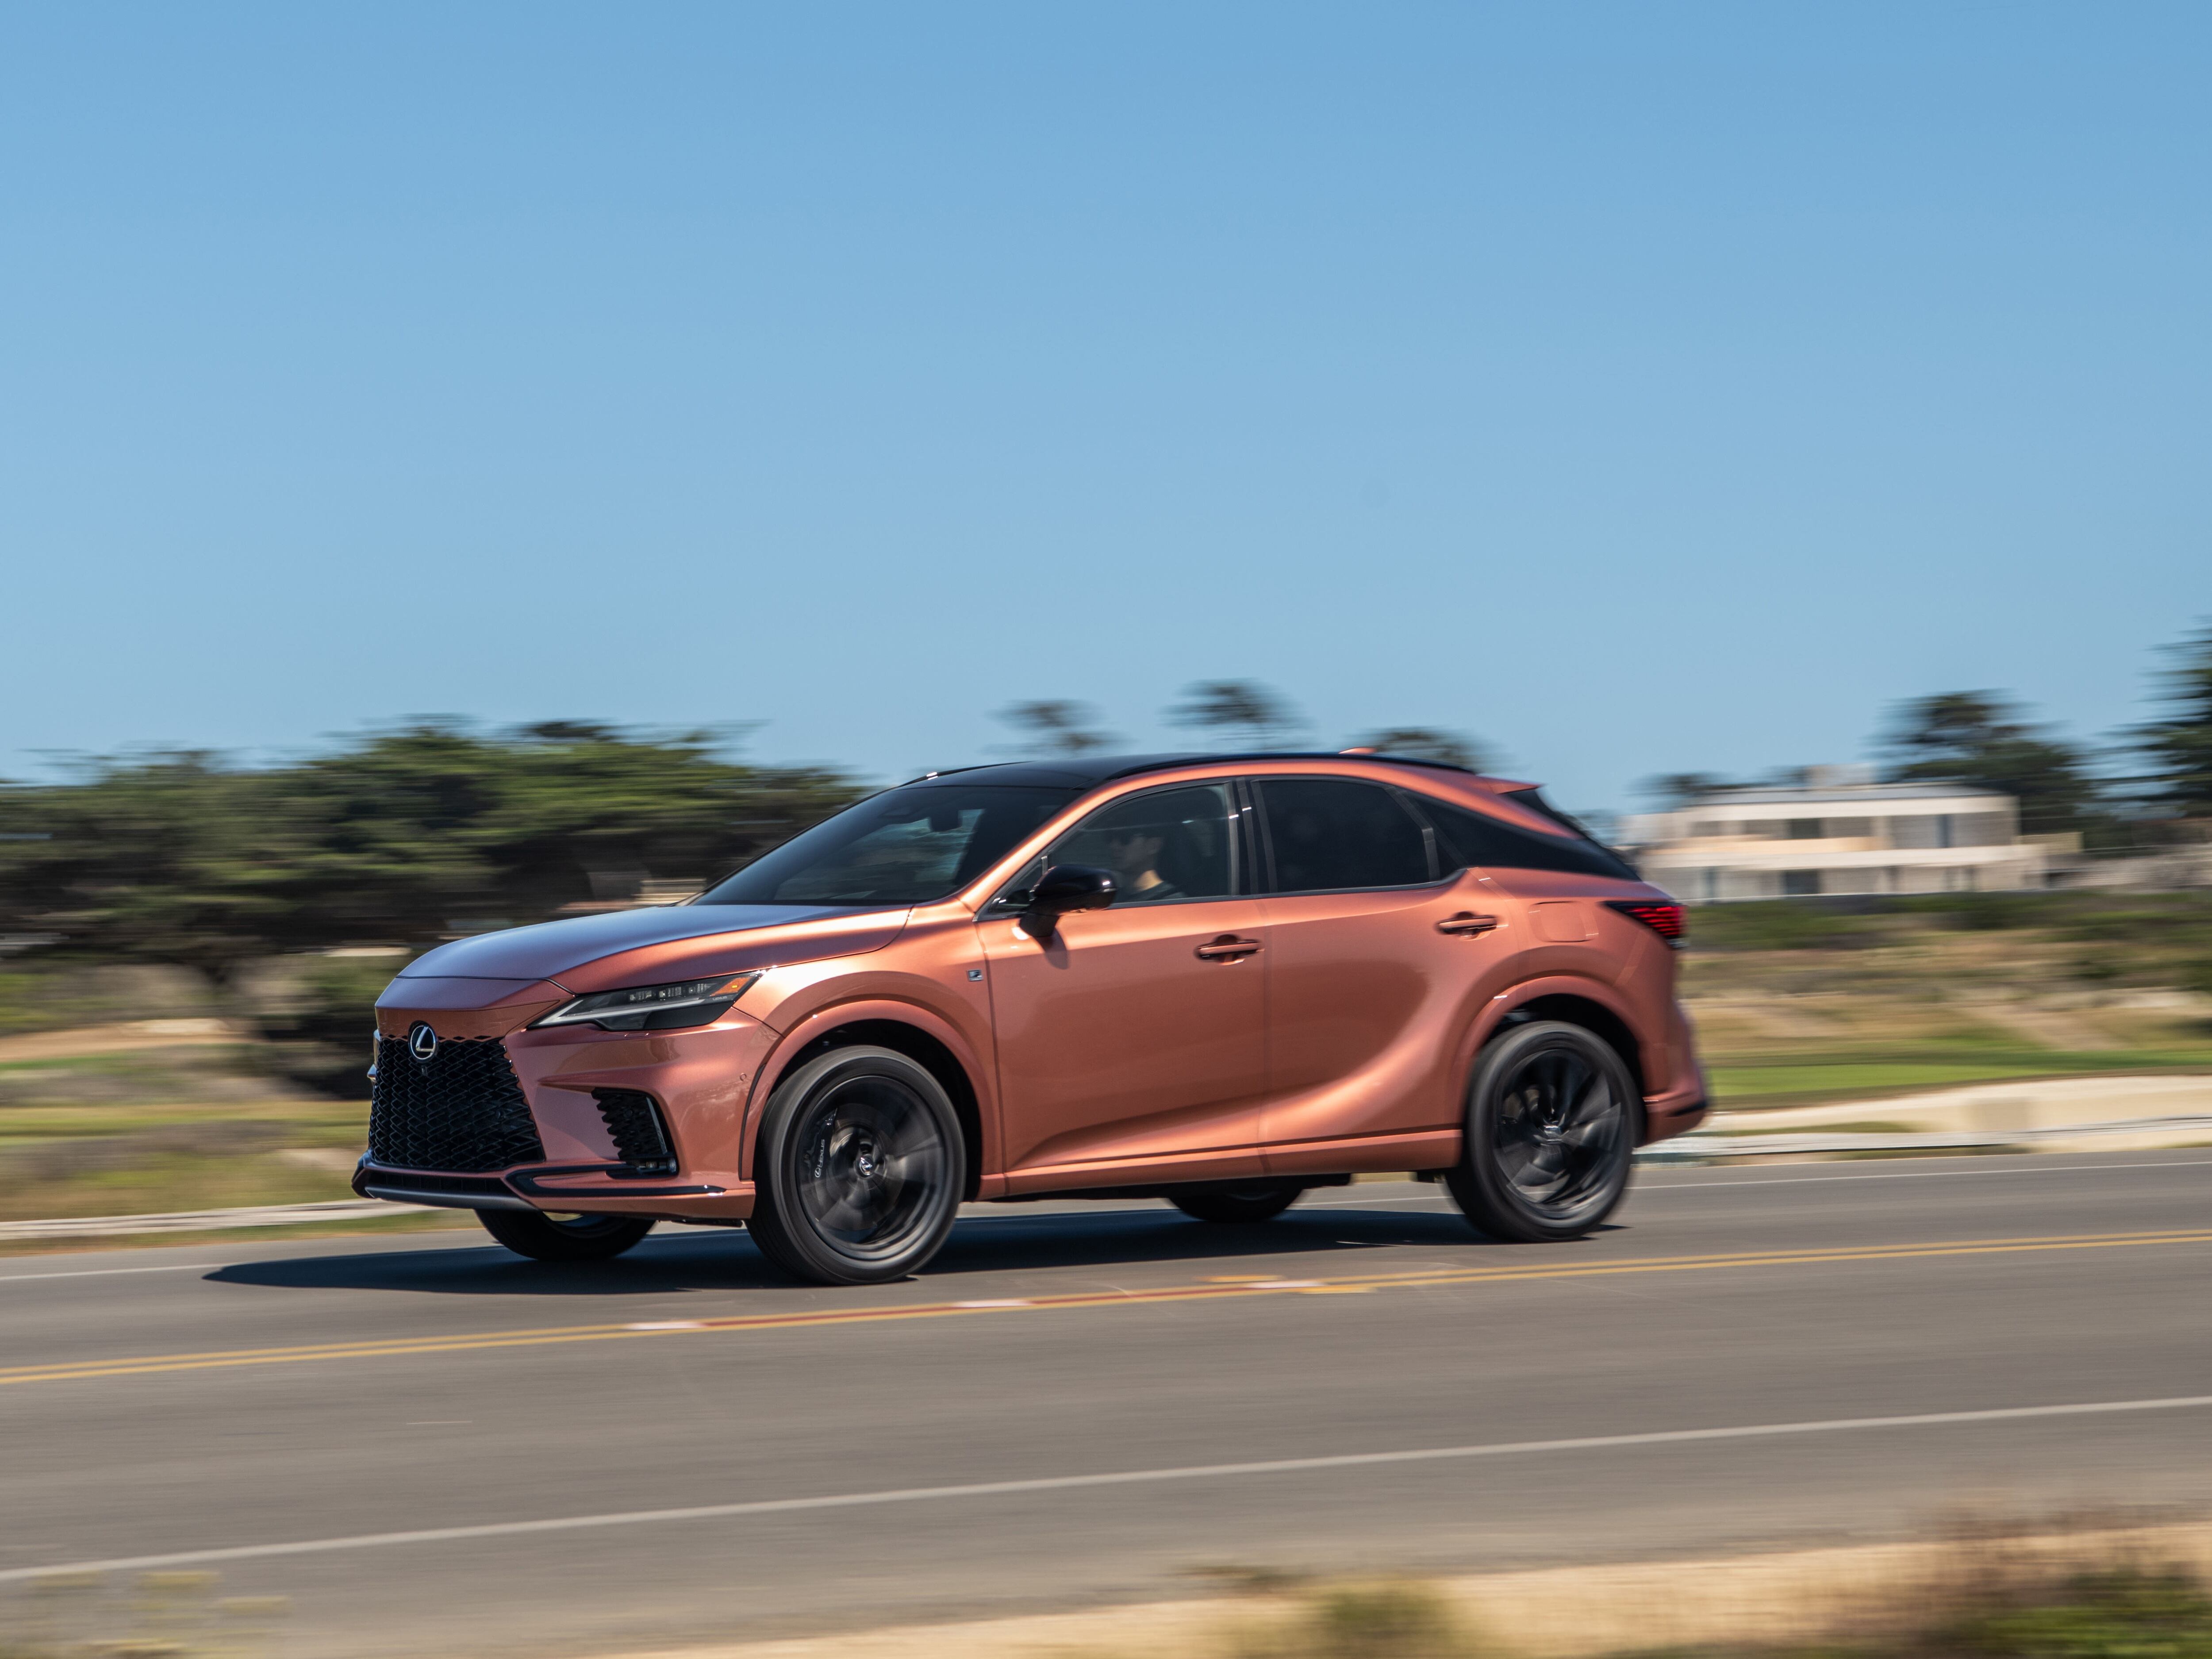 First Drive: The Lexus RX 500h aims to inject some extra performance into this large SUV